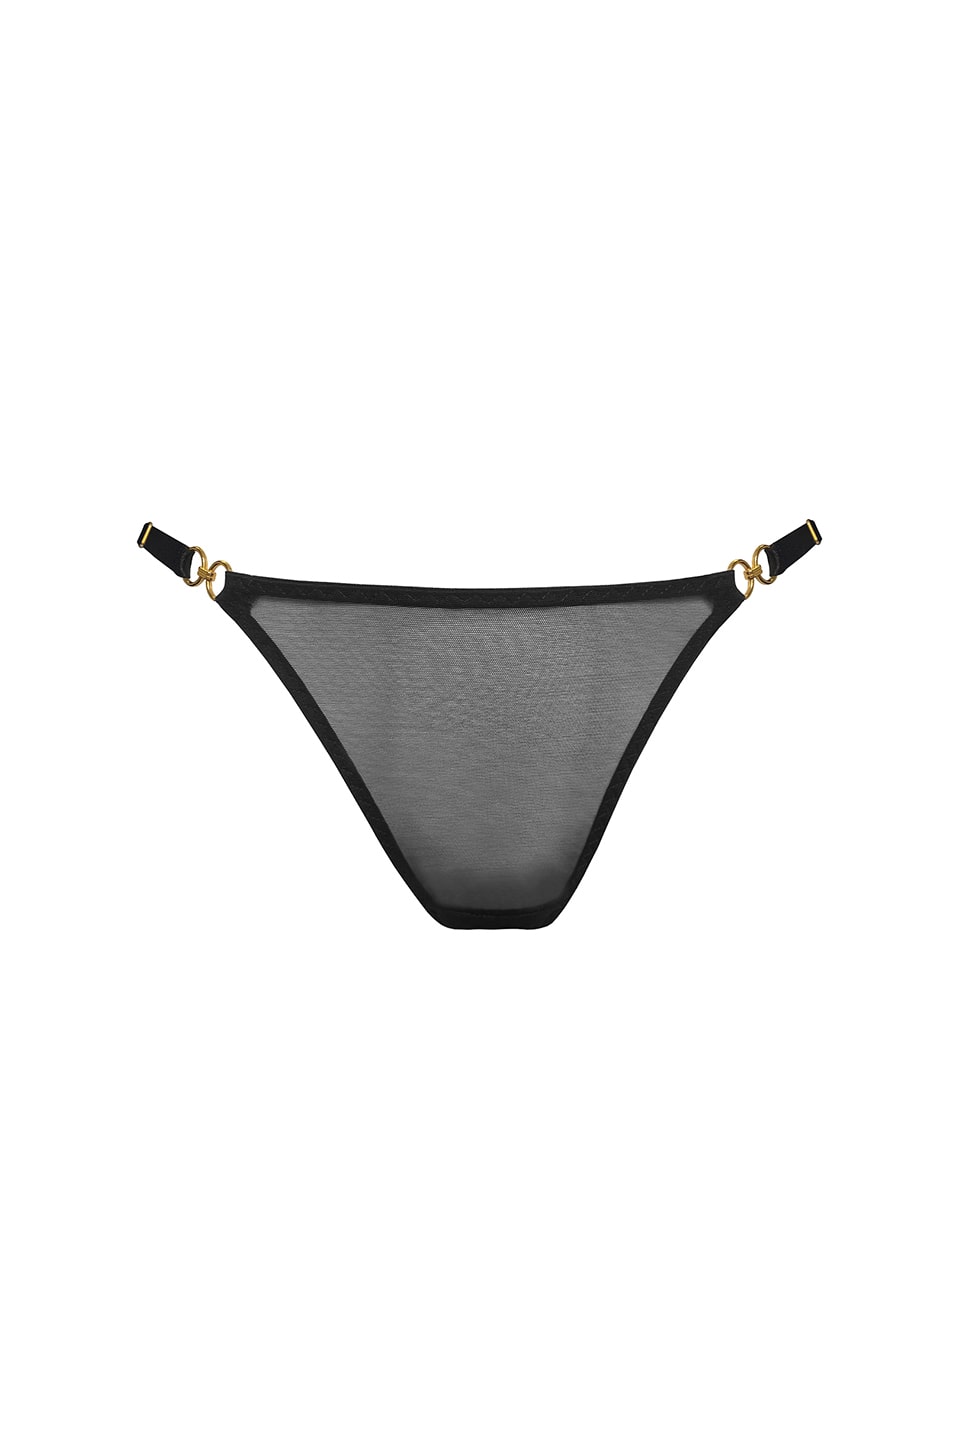 Thumbnail for Product gallery 1, Dia Brief Black